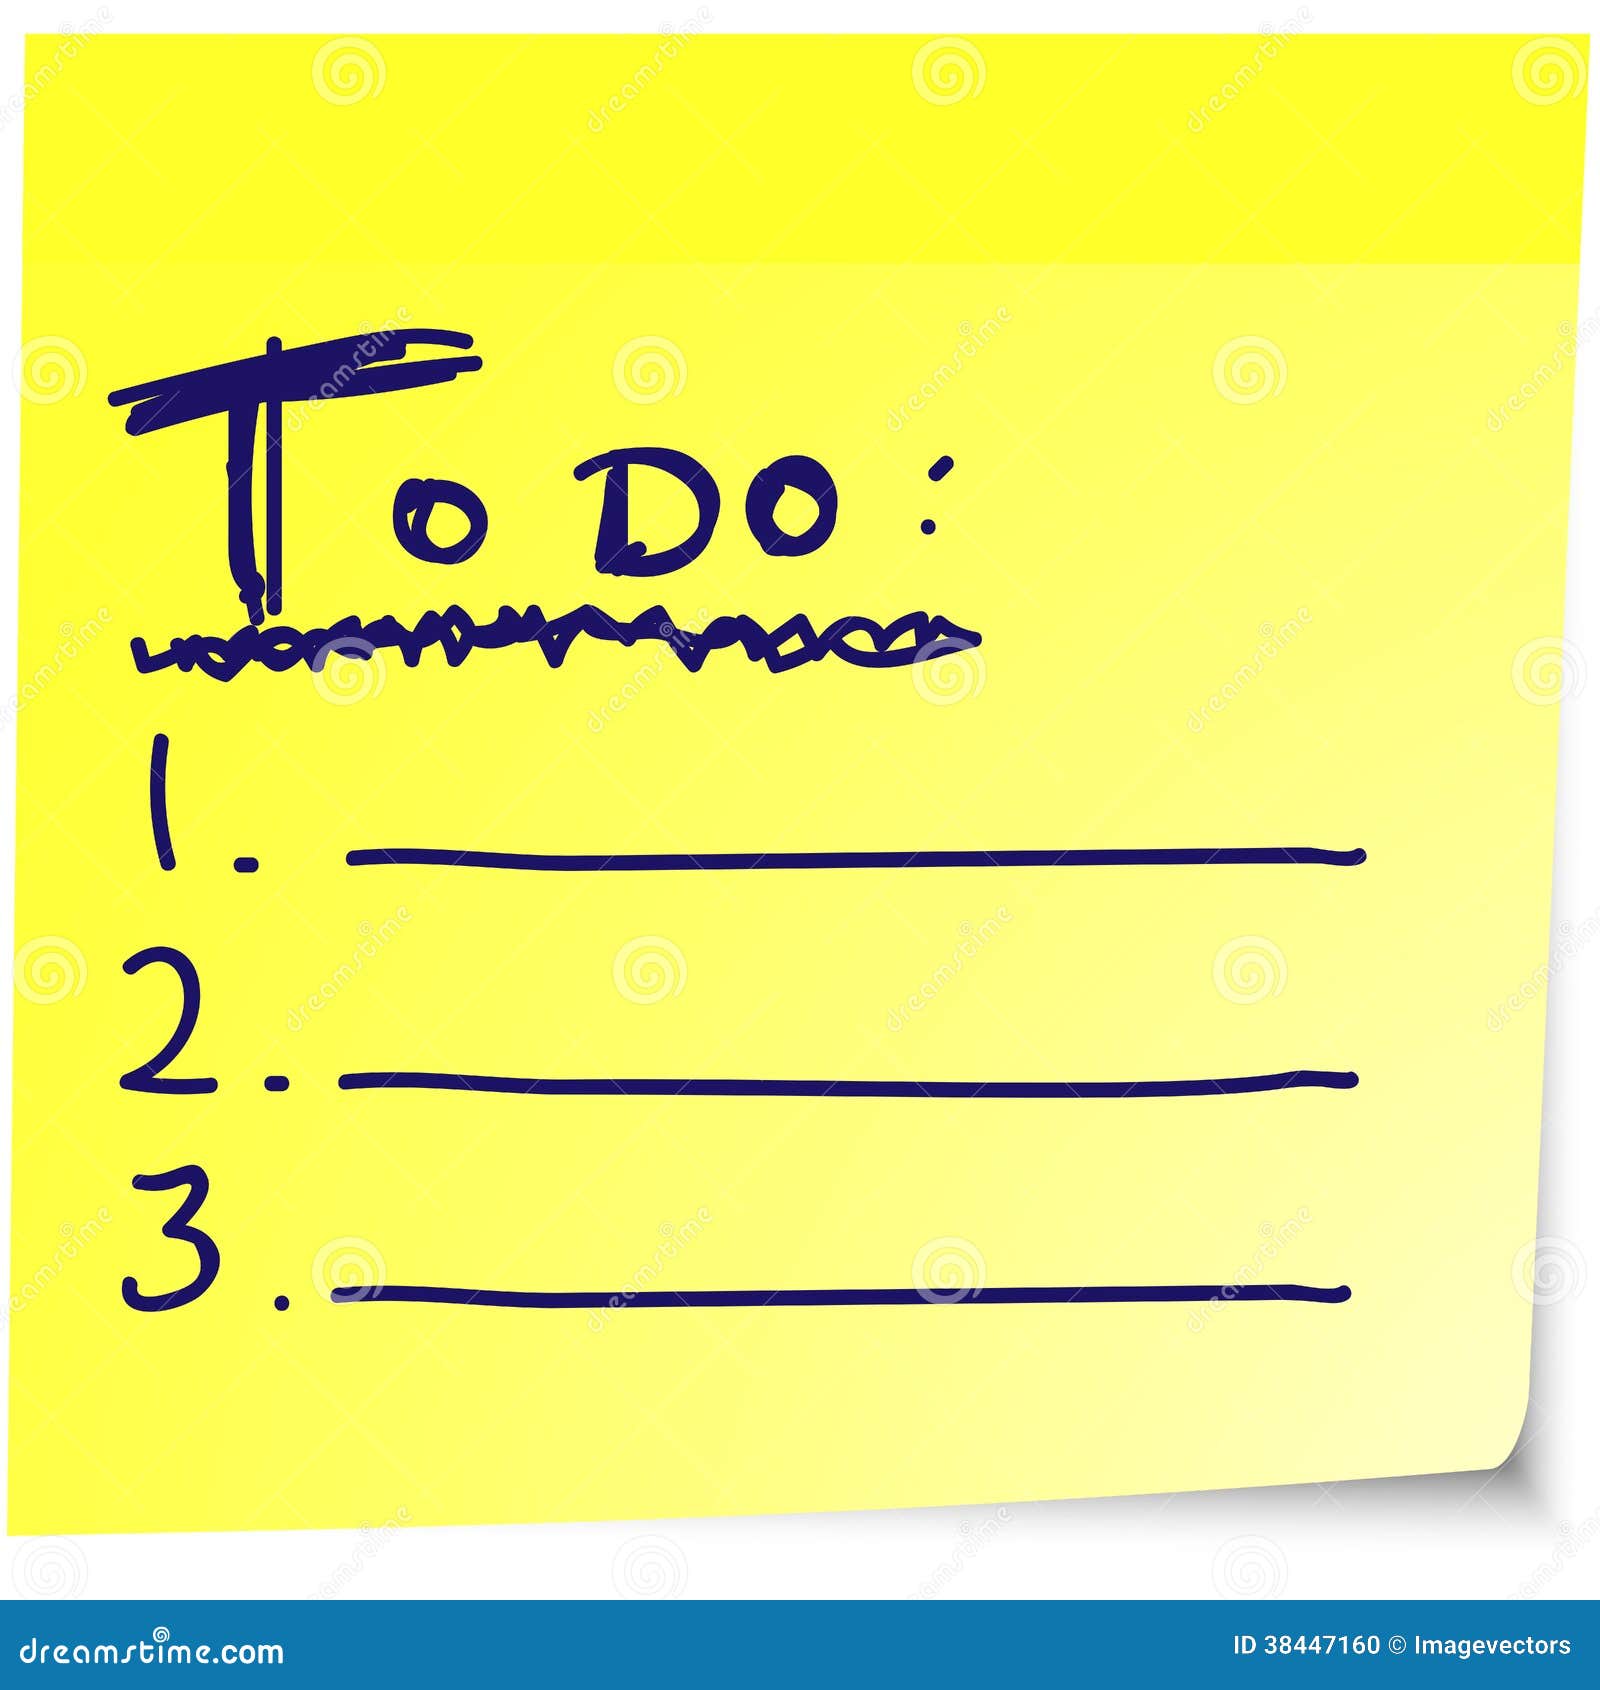 Post it Note To-Do List - The Sunny Side Up Blog | to do list note
